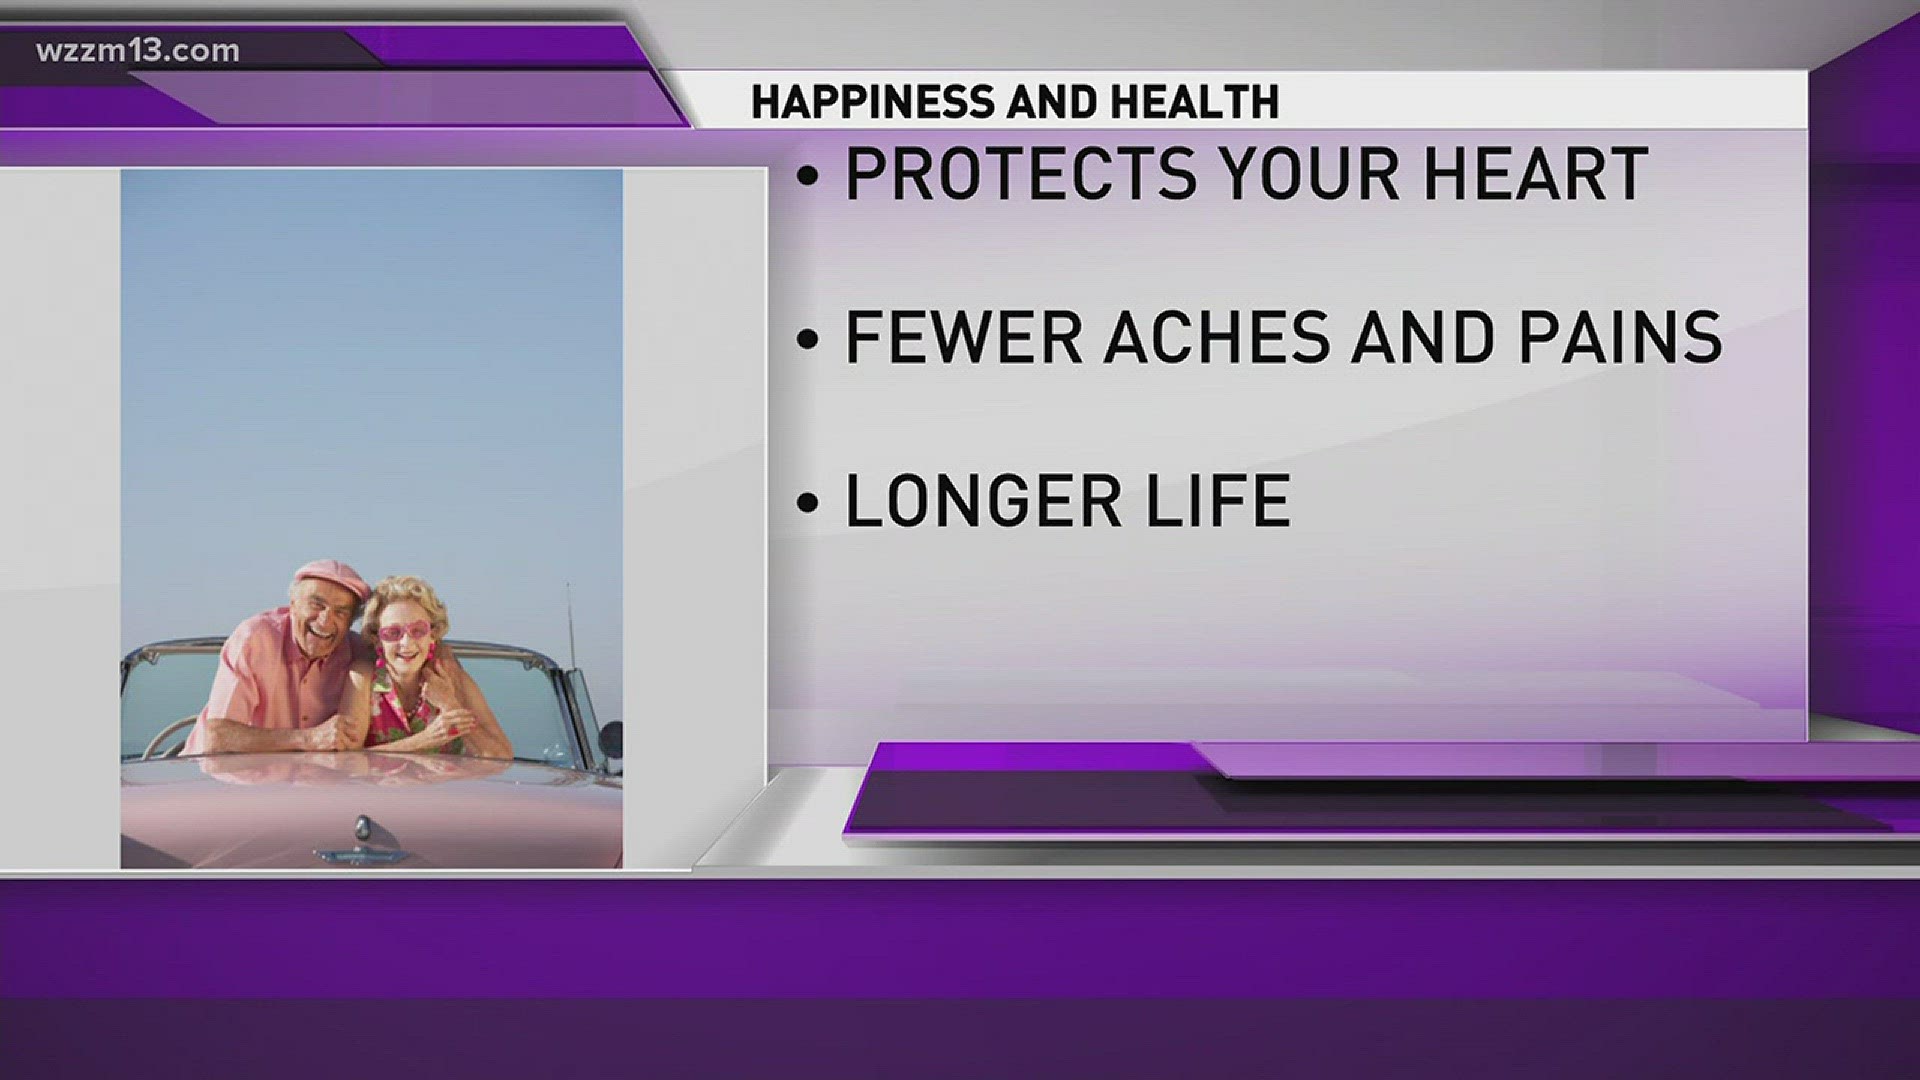 How happiness keeps you healthy